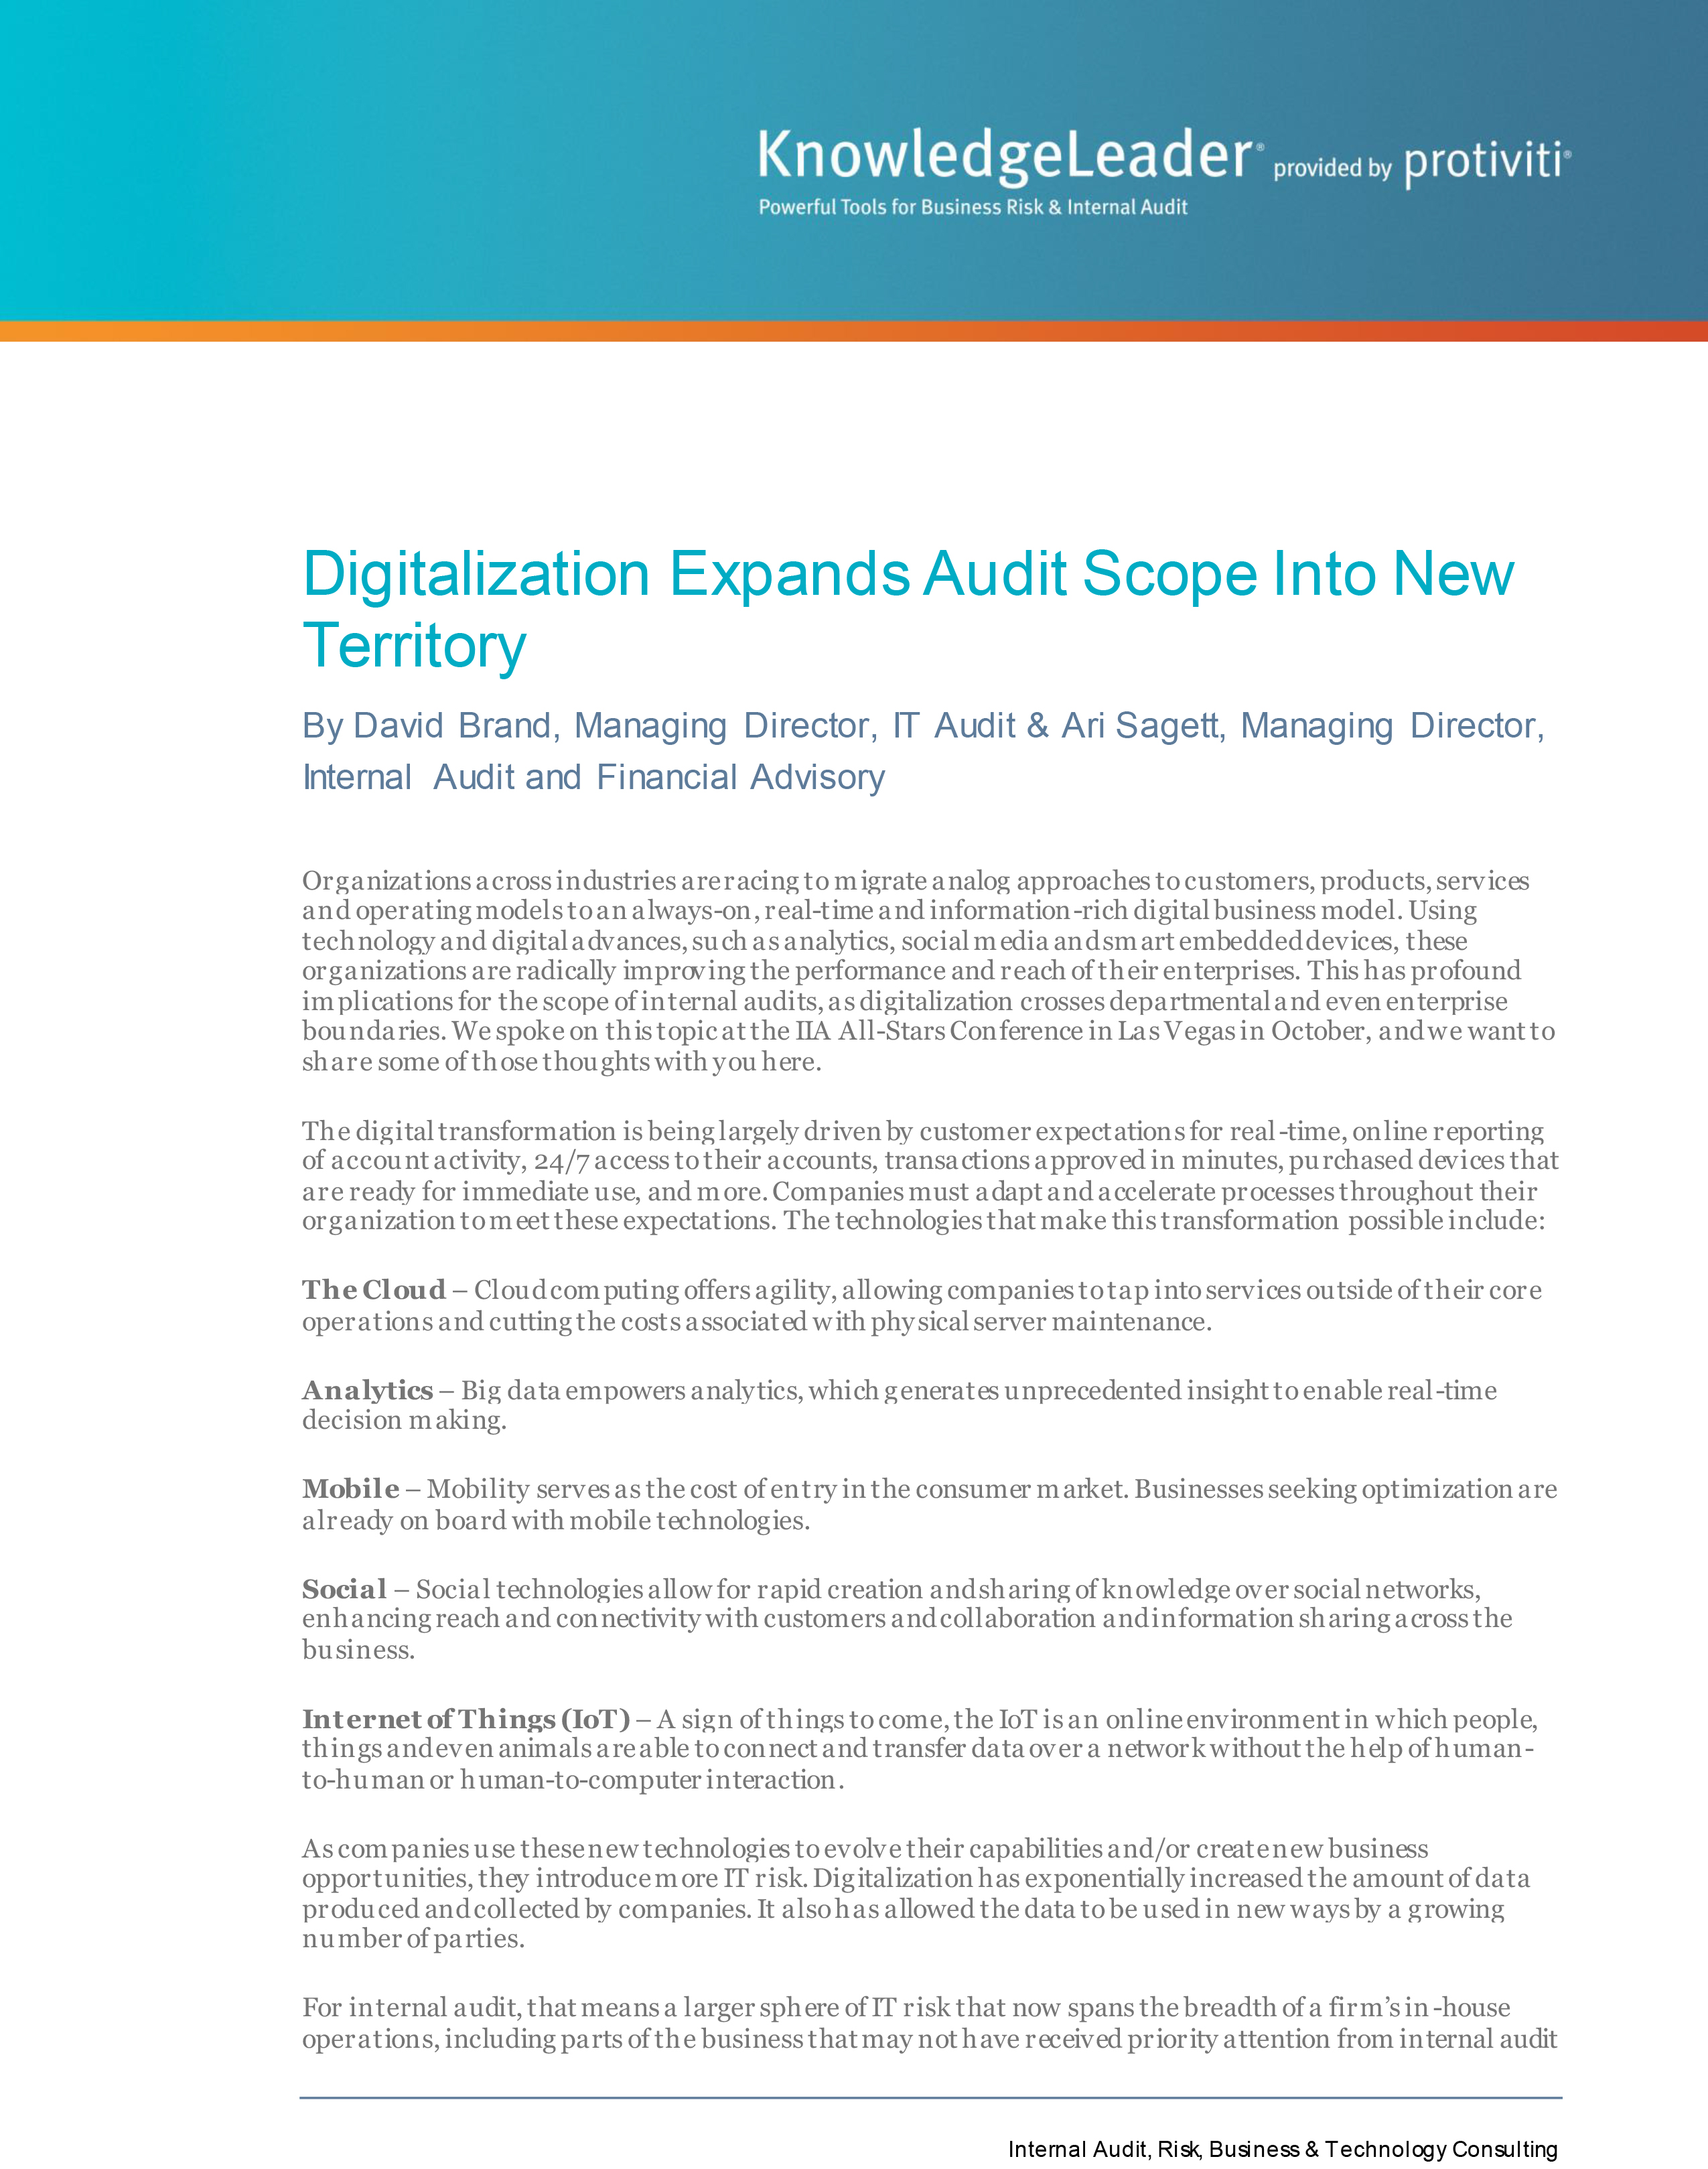 Screenshot of the first page of Digitalization Expands Audit Scope Into New Territory